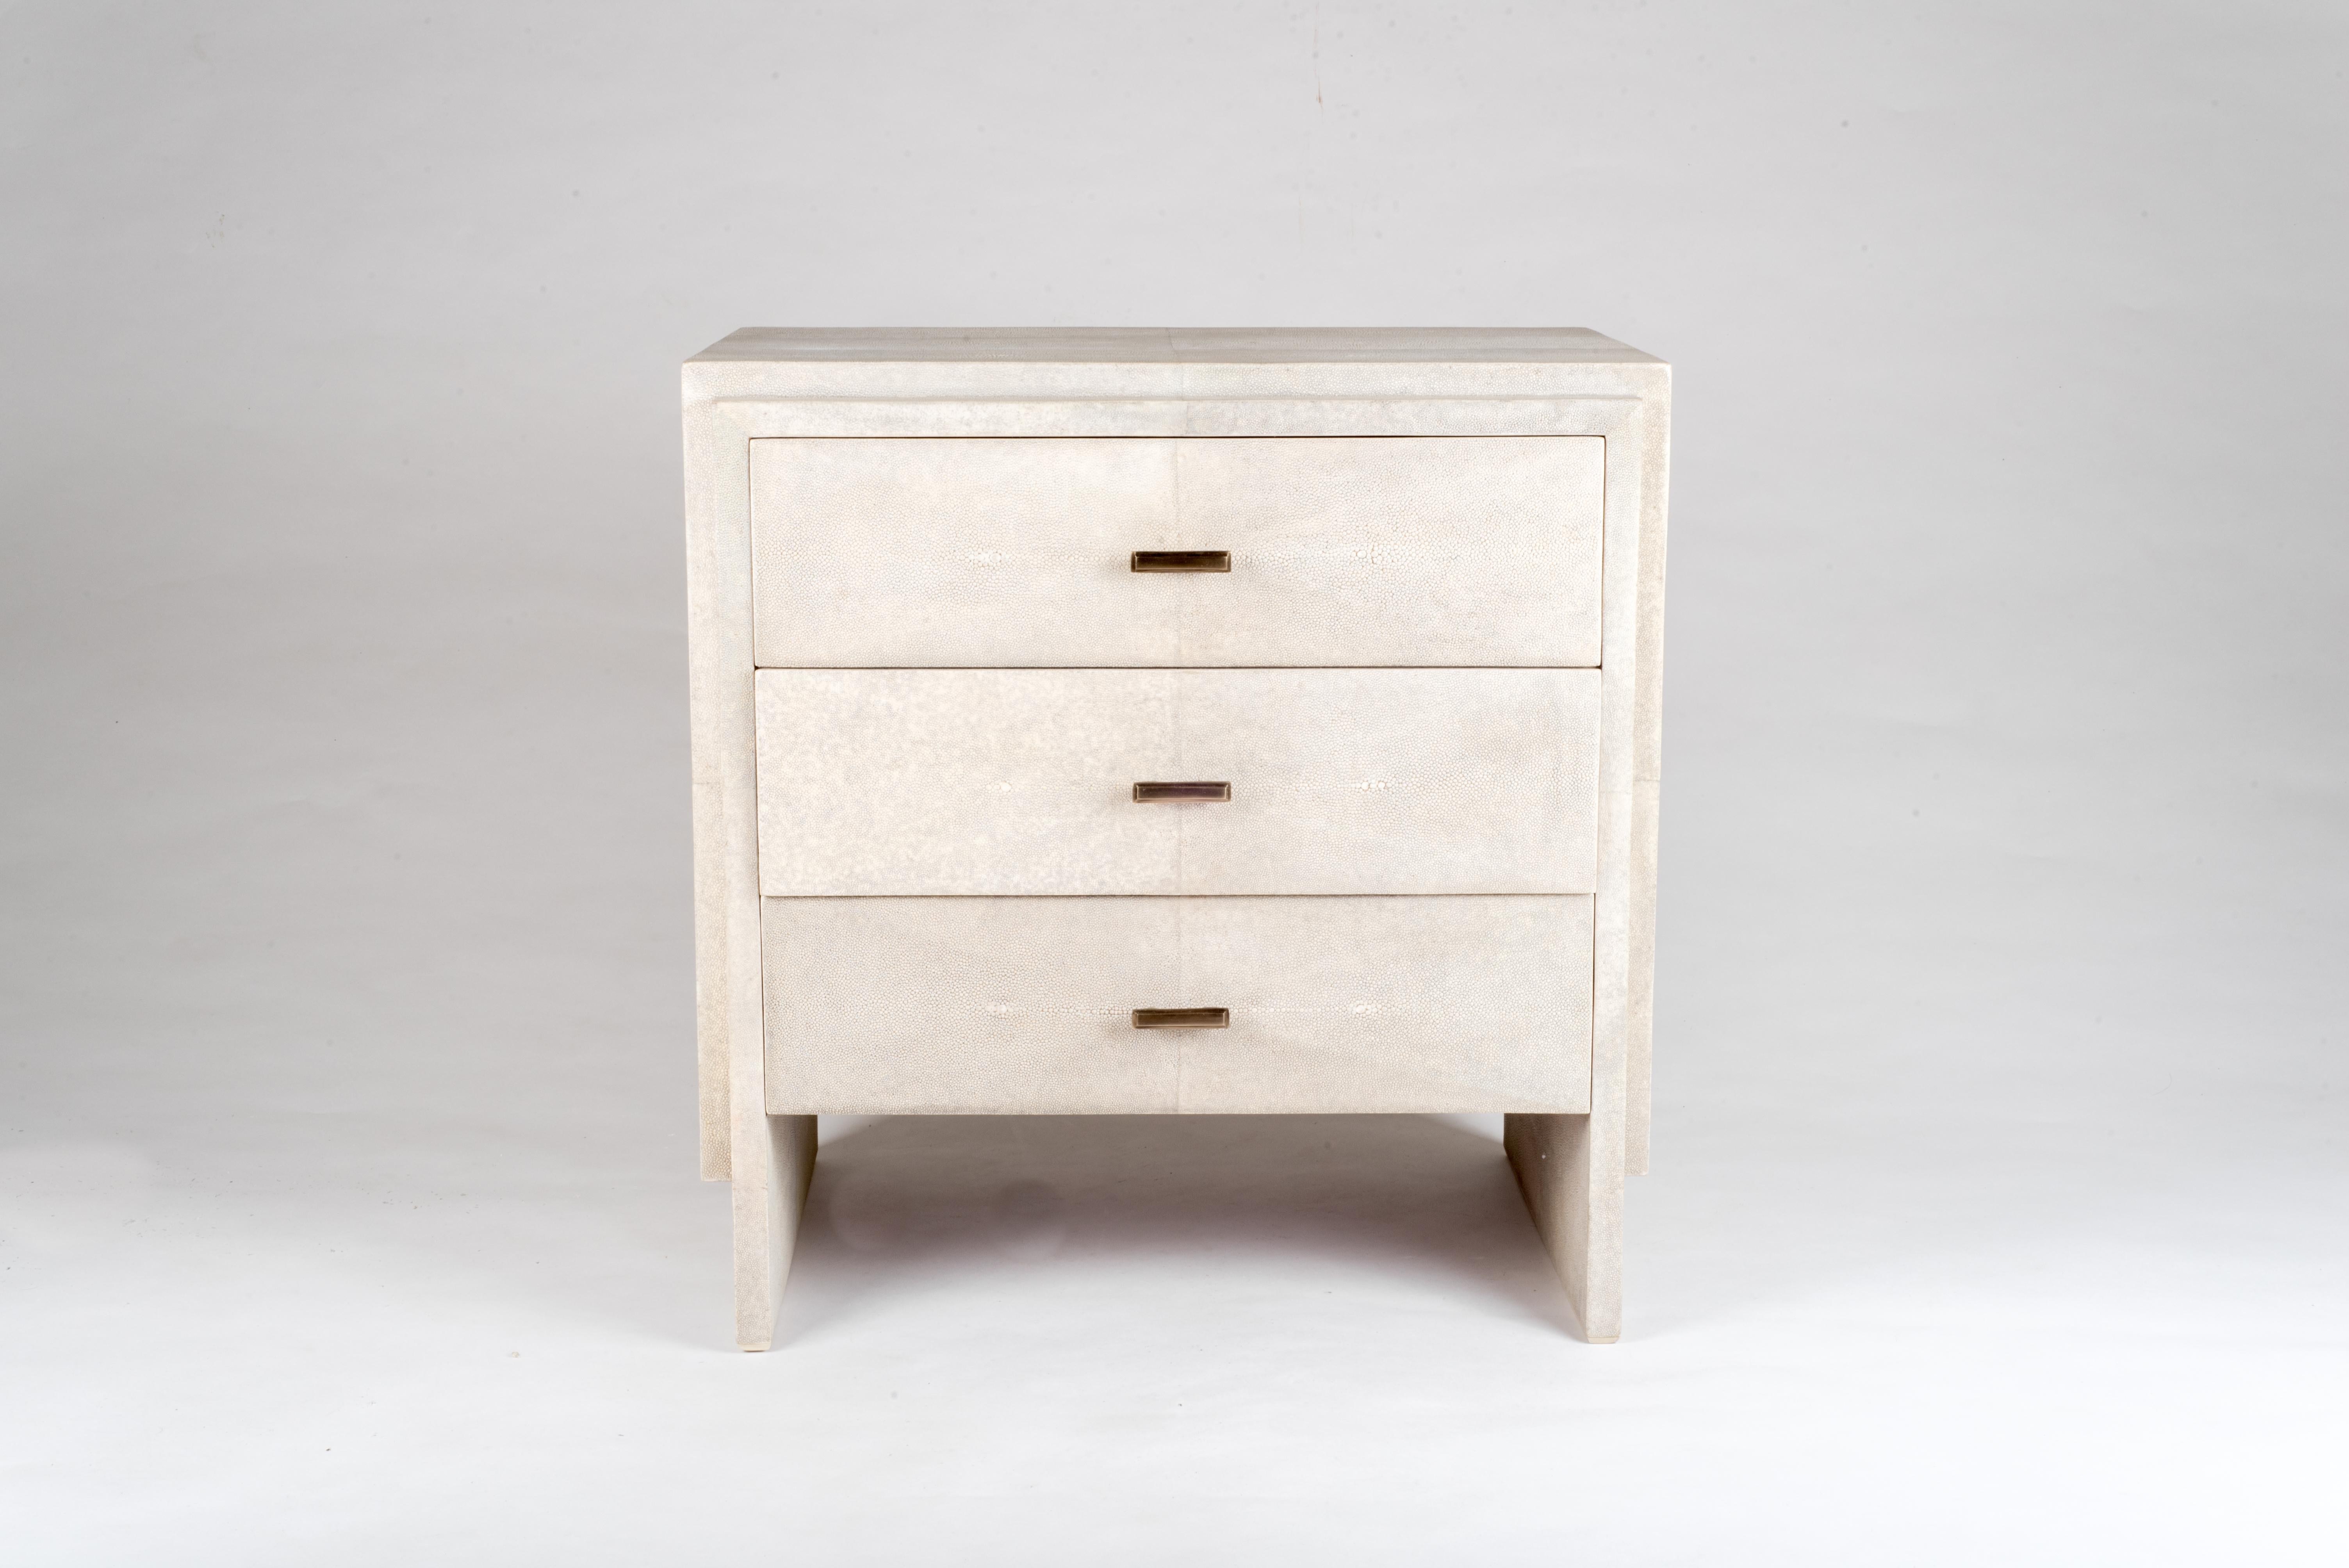 French Iconic Bedside Table with Beveled Drawers in Cream Shagreen by R&Y Augousti